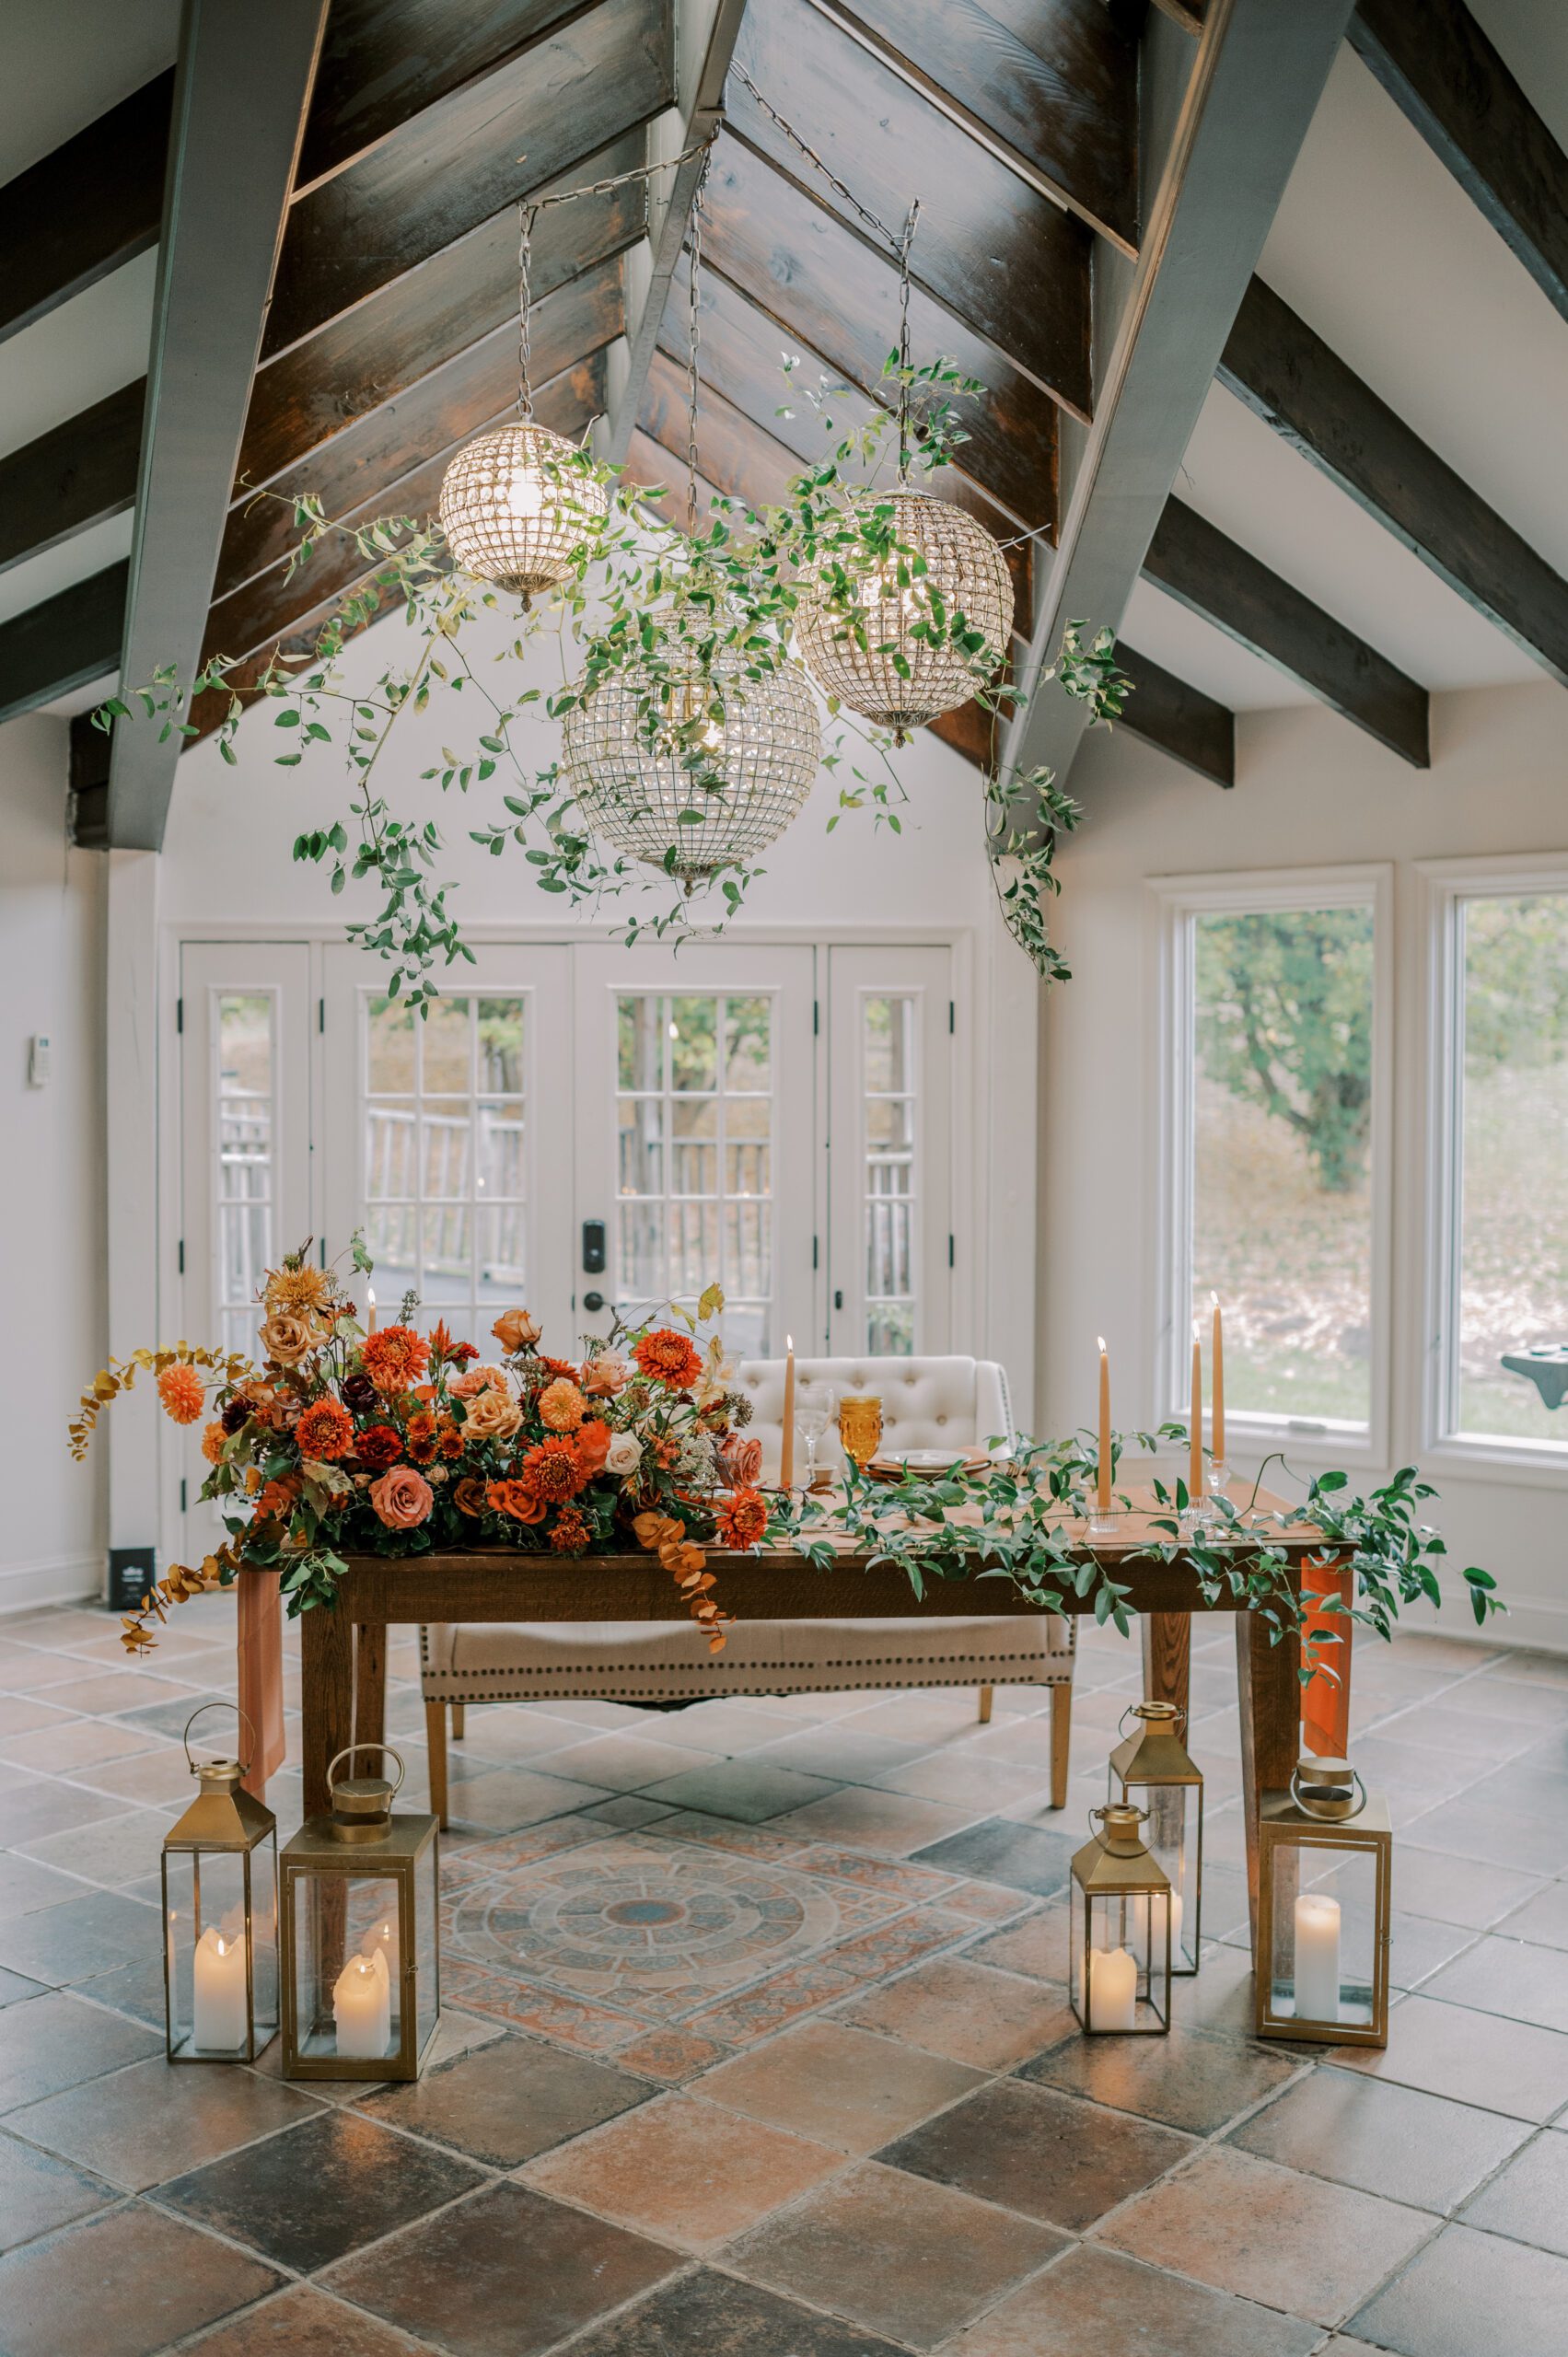 Interior photo of the manor at airmont of bride and groom's sweetheart table, covered in flowers and candles, with greenery and 3 large rounded hanging lights above